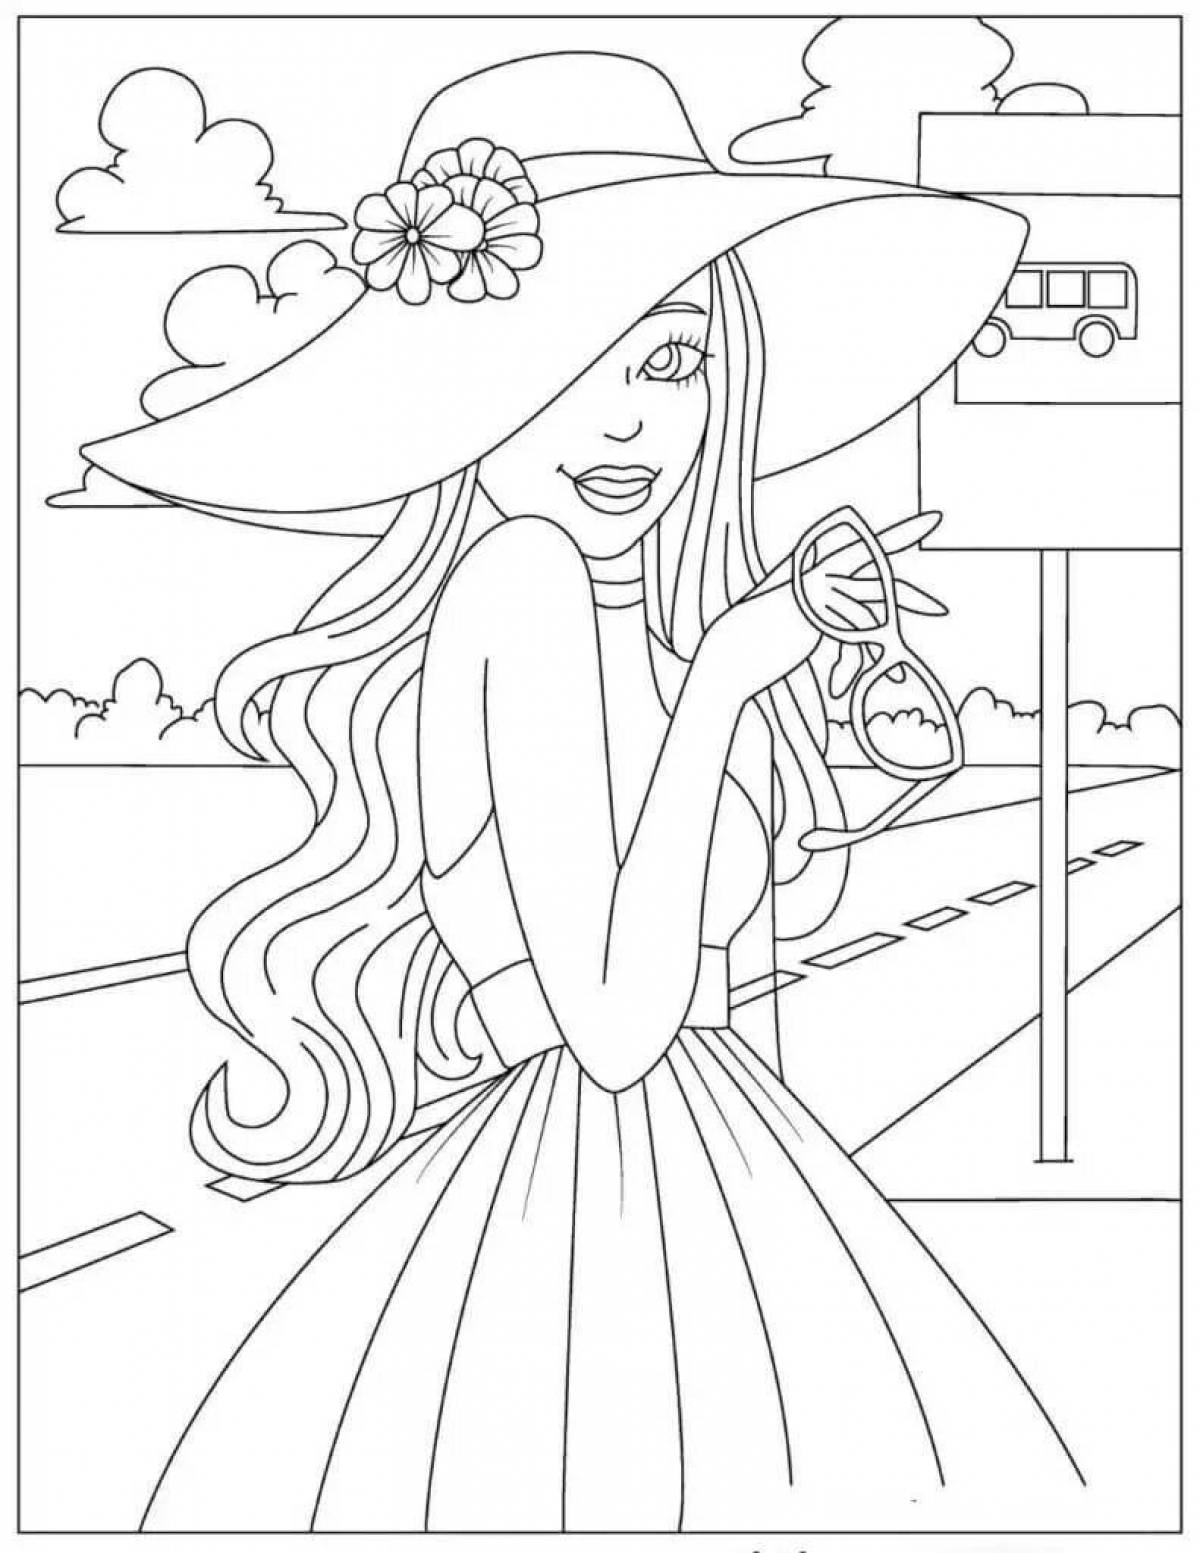 Beautiful barbie coloring book for kids 6-7 years old